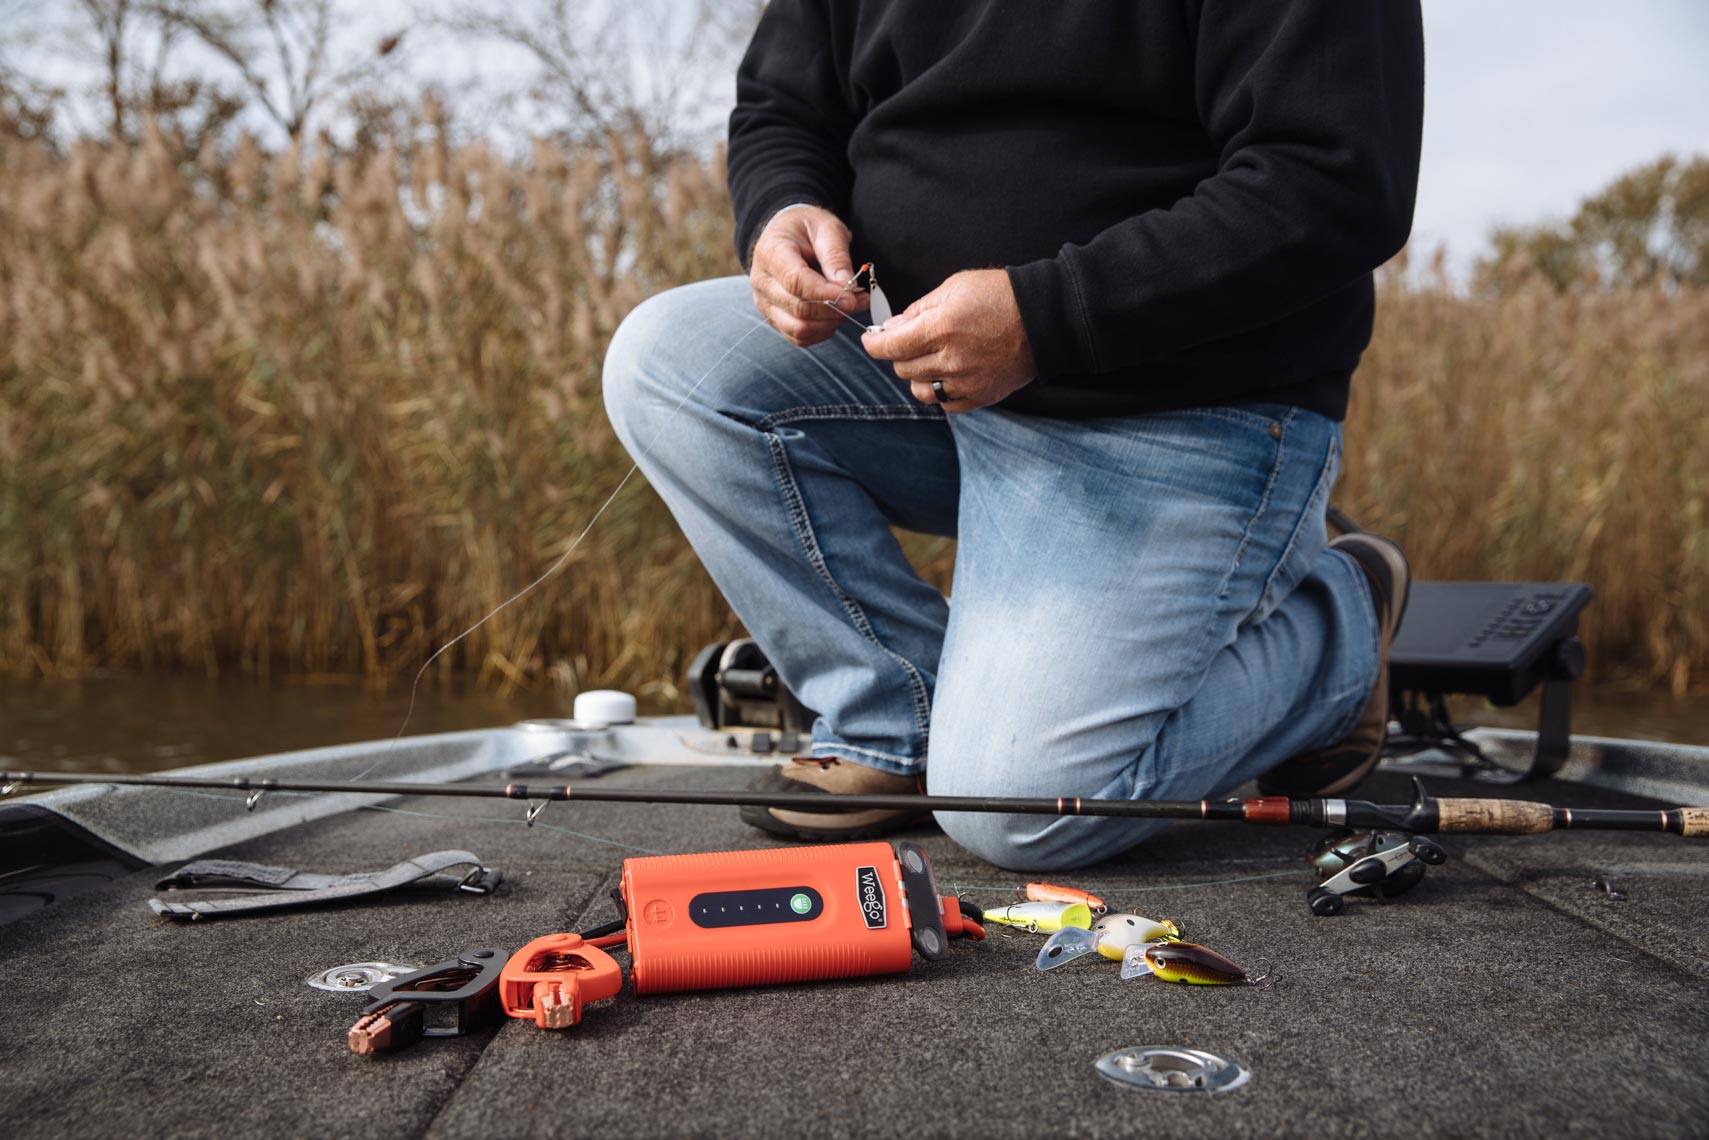 Portable battery in use by a bassmaster